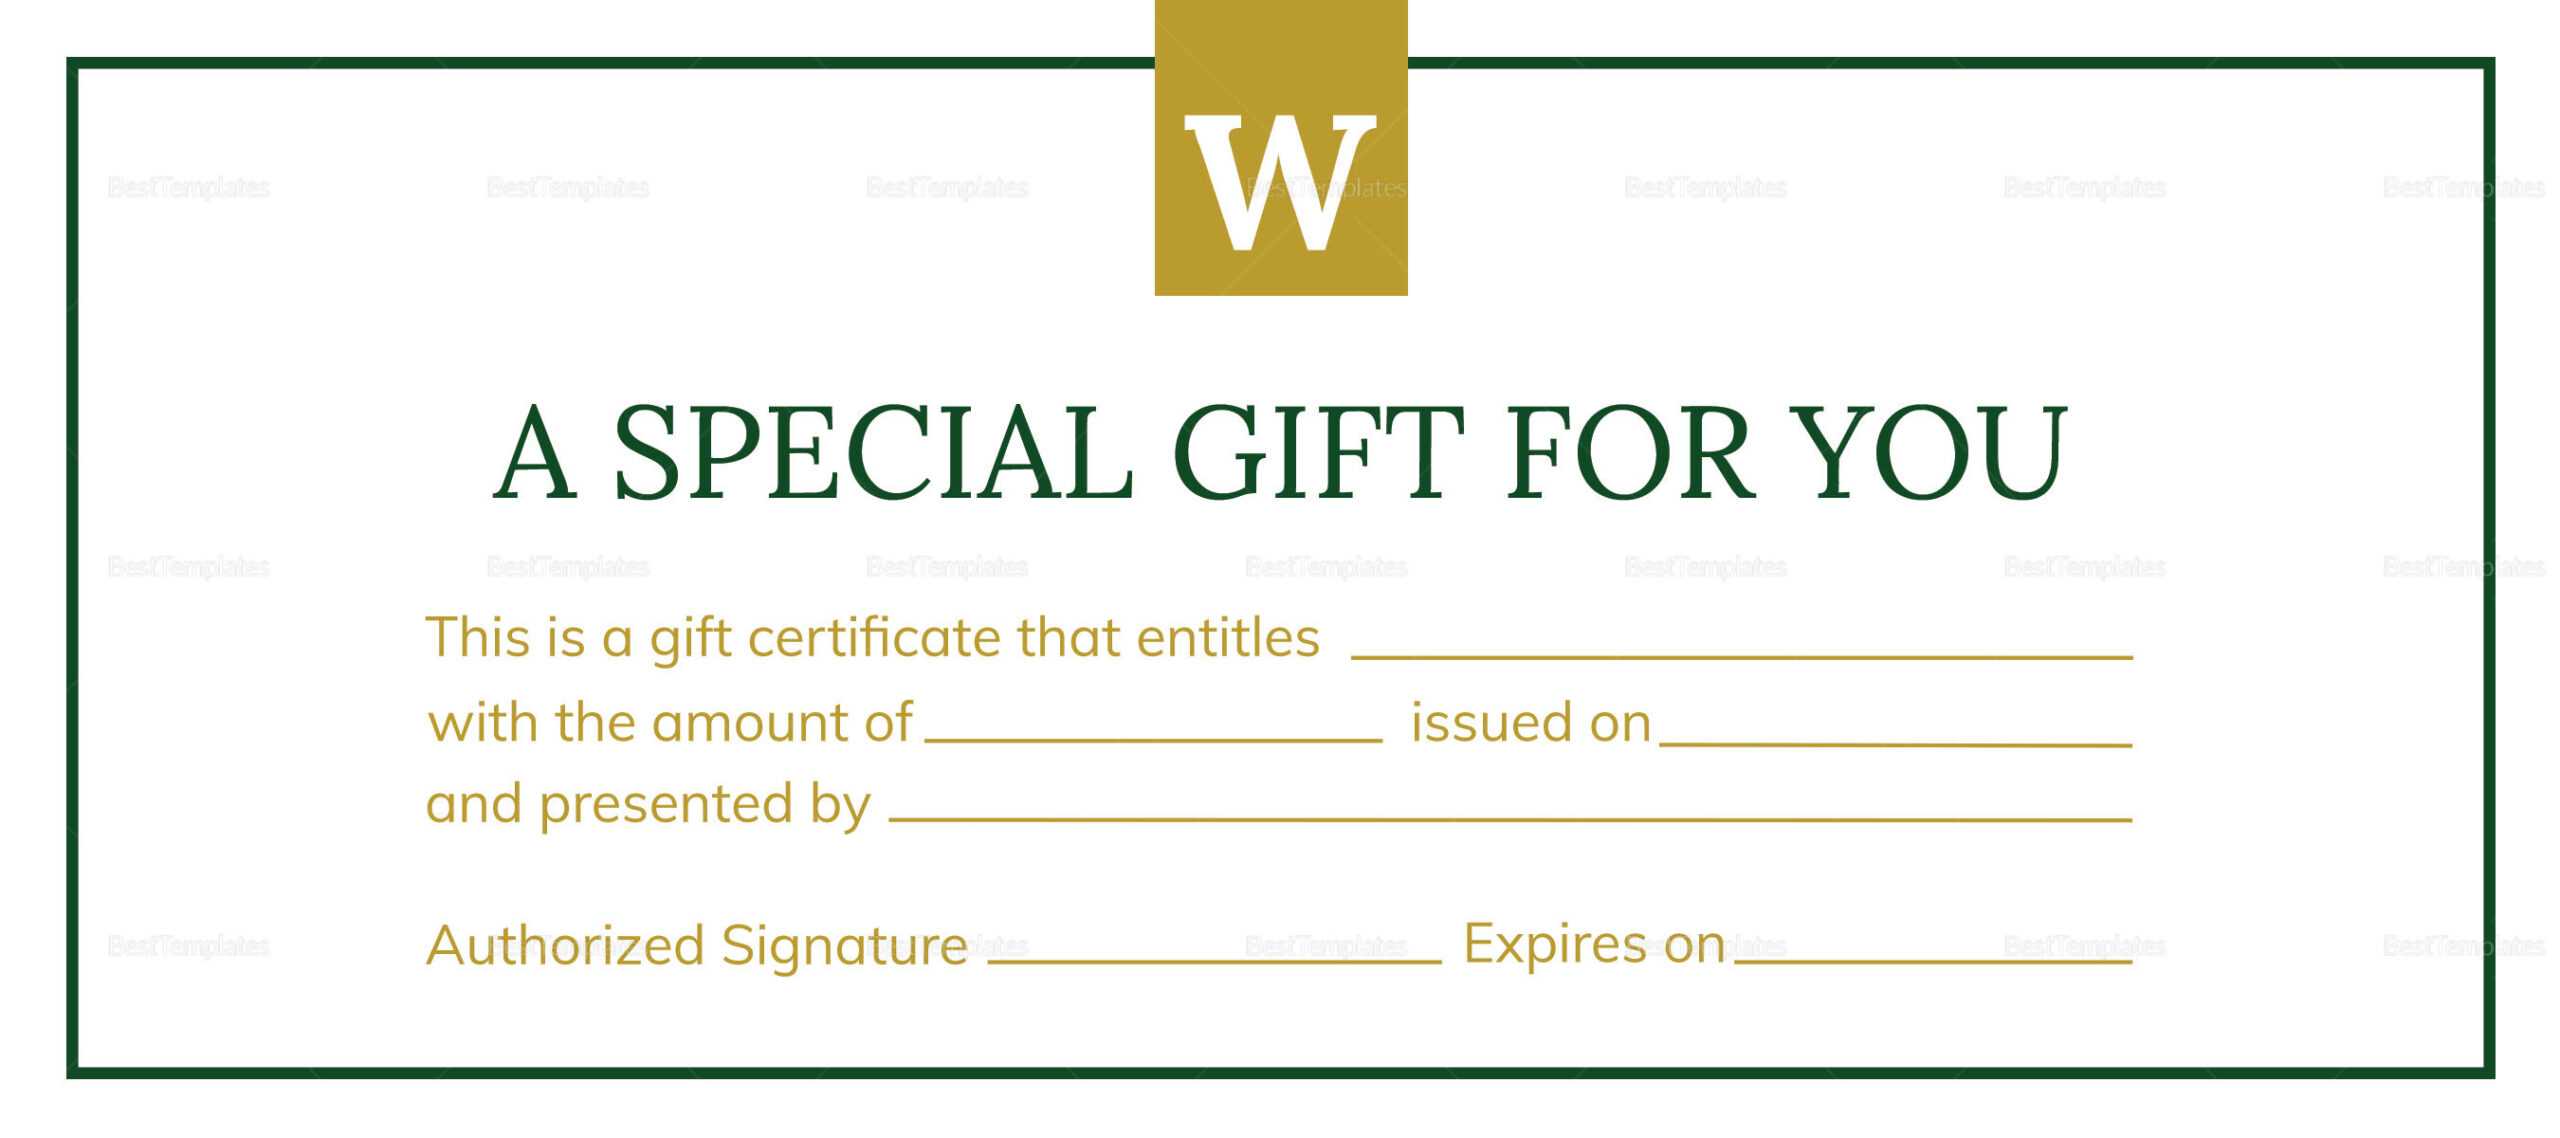 Gift Certificate Templates Indesign Illustrator Gift Coupon Intended For Indesign Gift Certificate Template